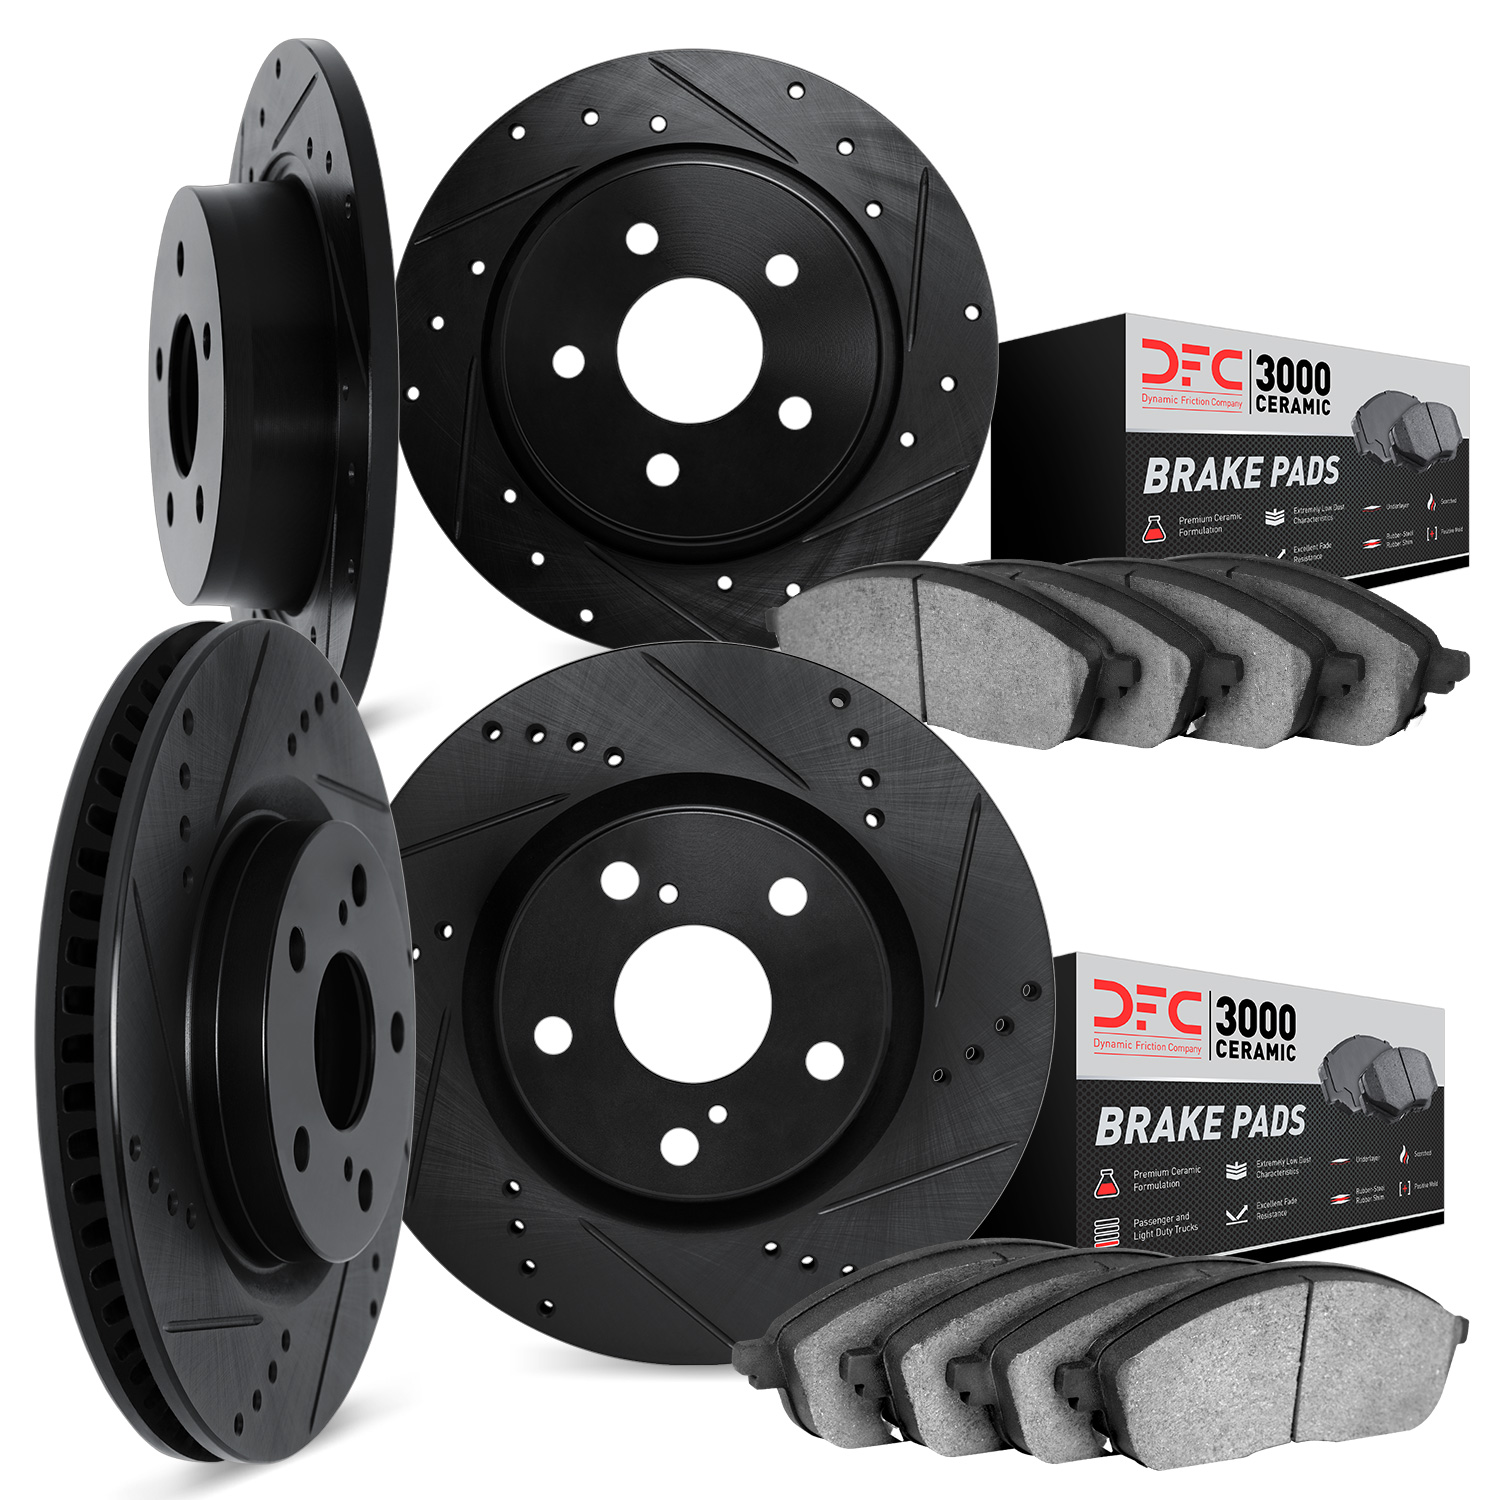 8304-63101 Drilled/Slotted Brake Rotors with 3000-Series Ceramic Brake Pads Kit [Black], 2003-2009 Mercedes-Benz, Position: Fron